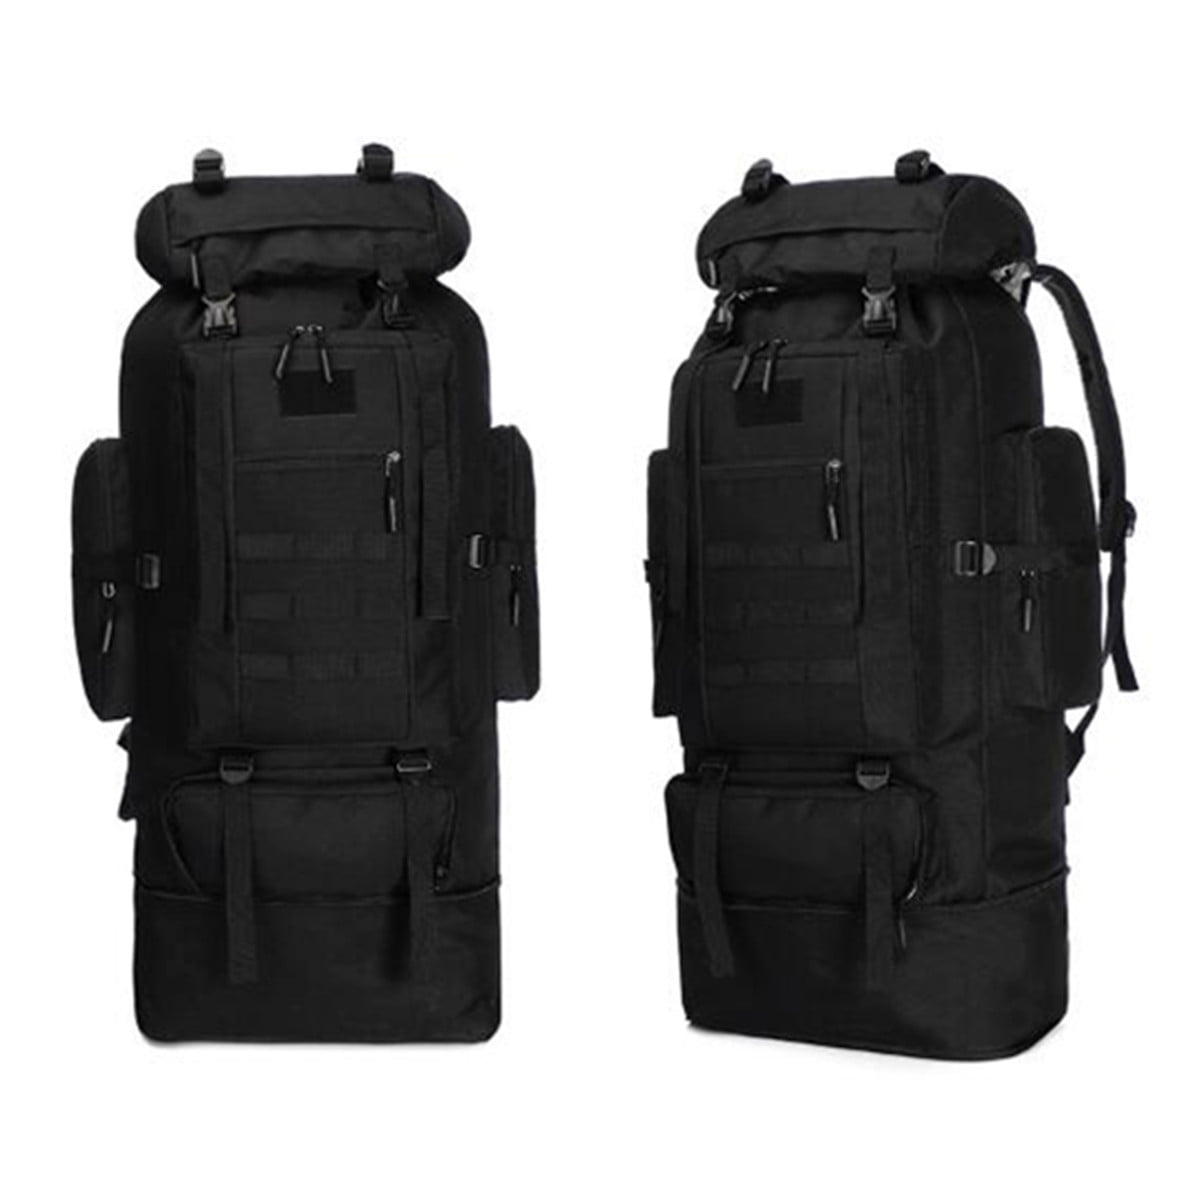 100L Military Tactical Backpack Rucksack Luggage Outdoor Travel Hikin 